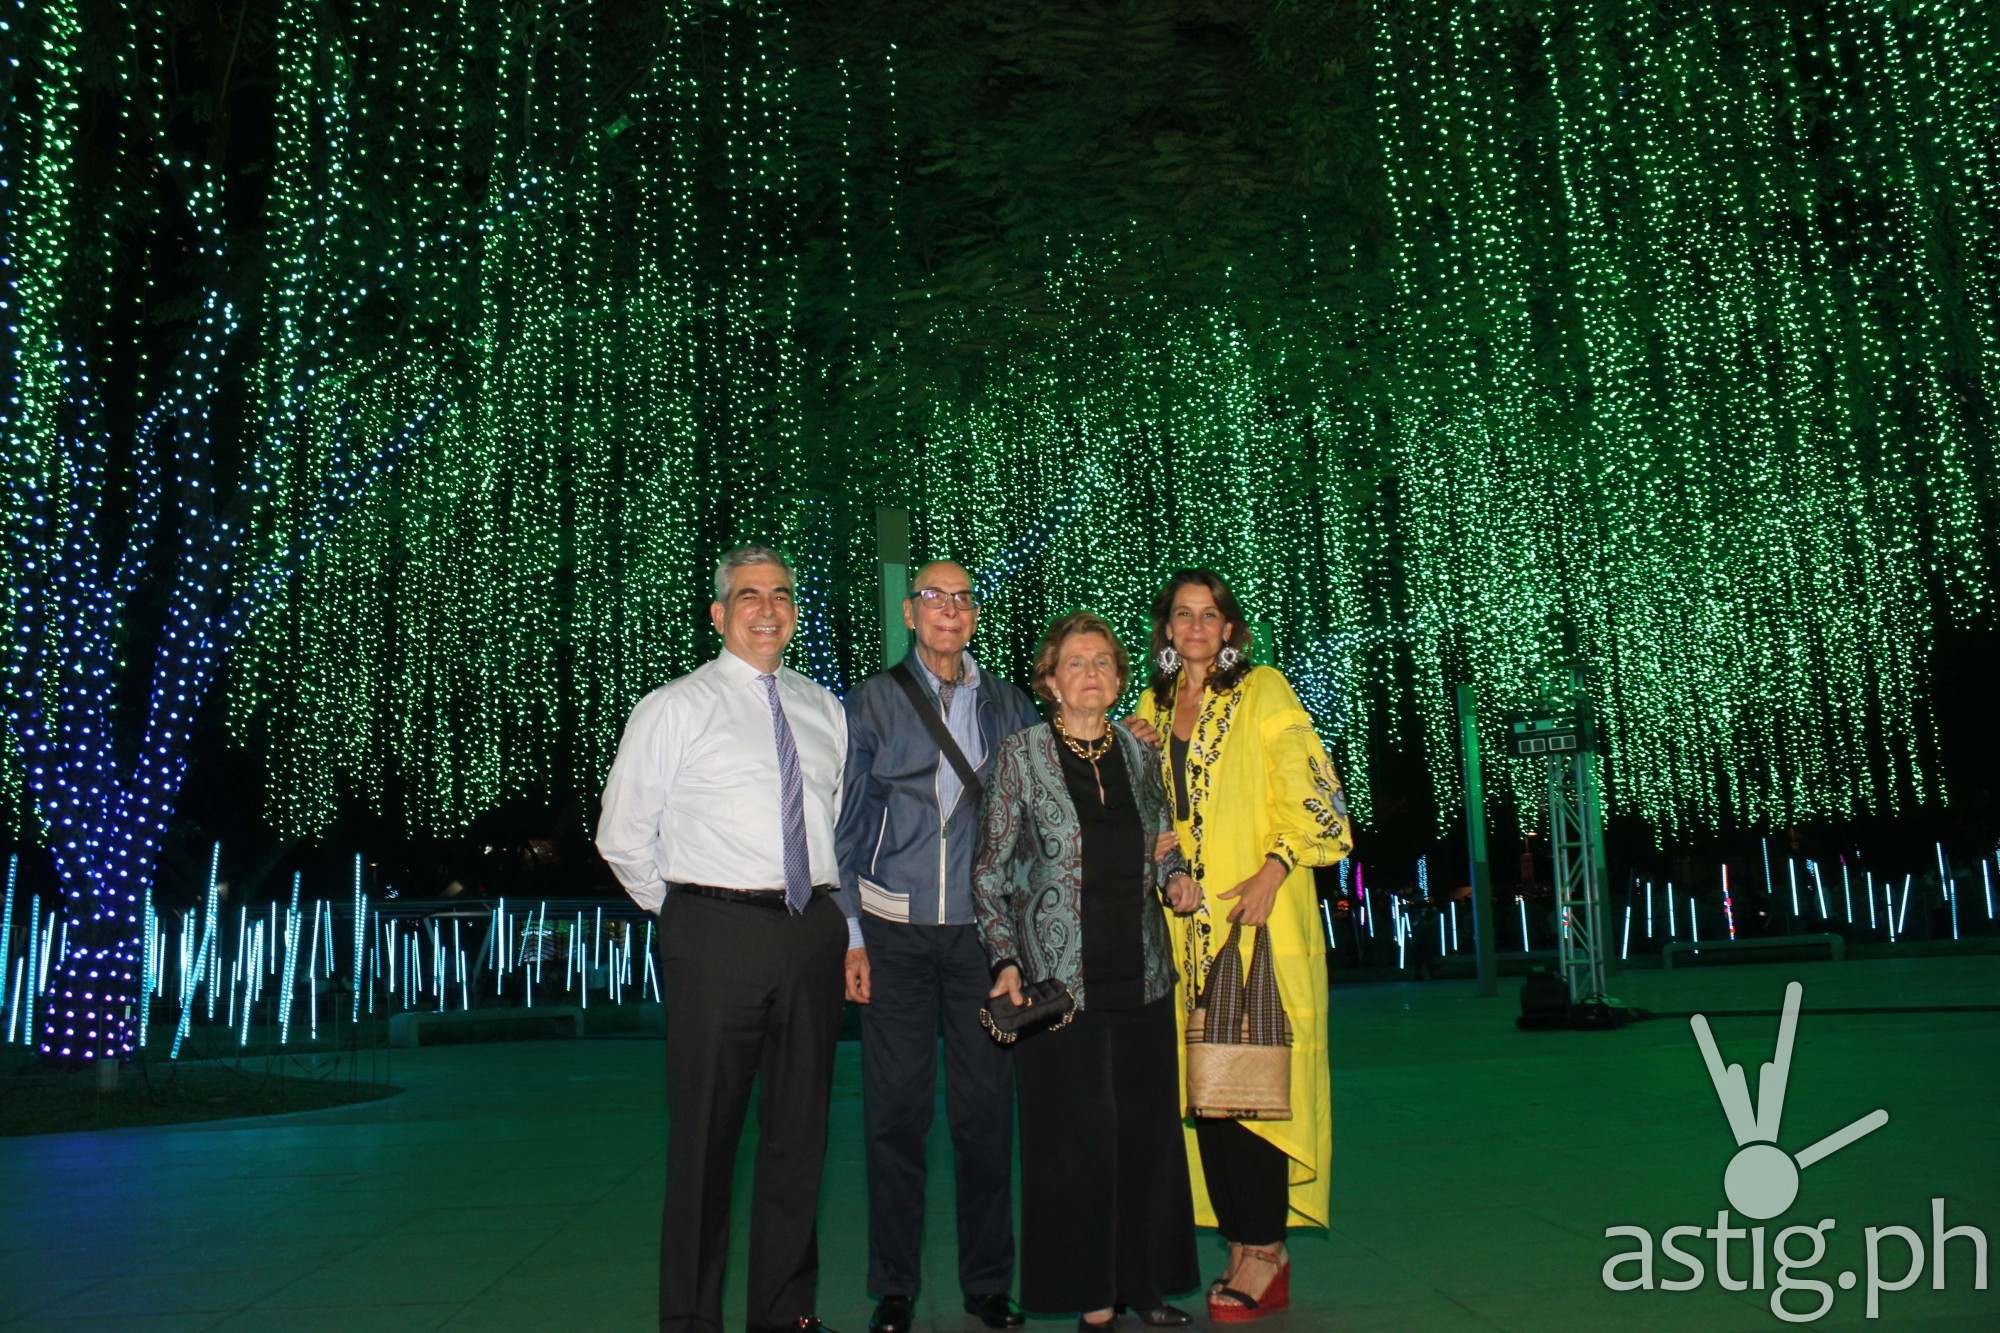 The Zobel family at the Ayala Triangle Gardens as they witness the world-class Festival of Lights.